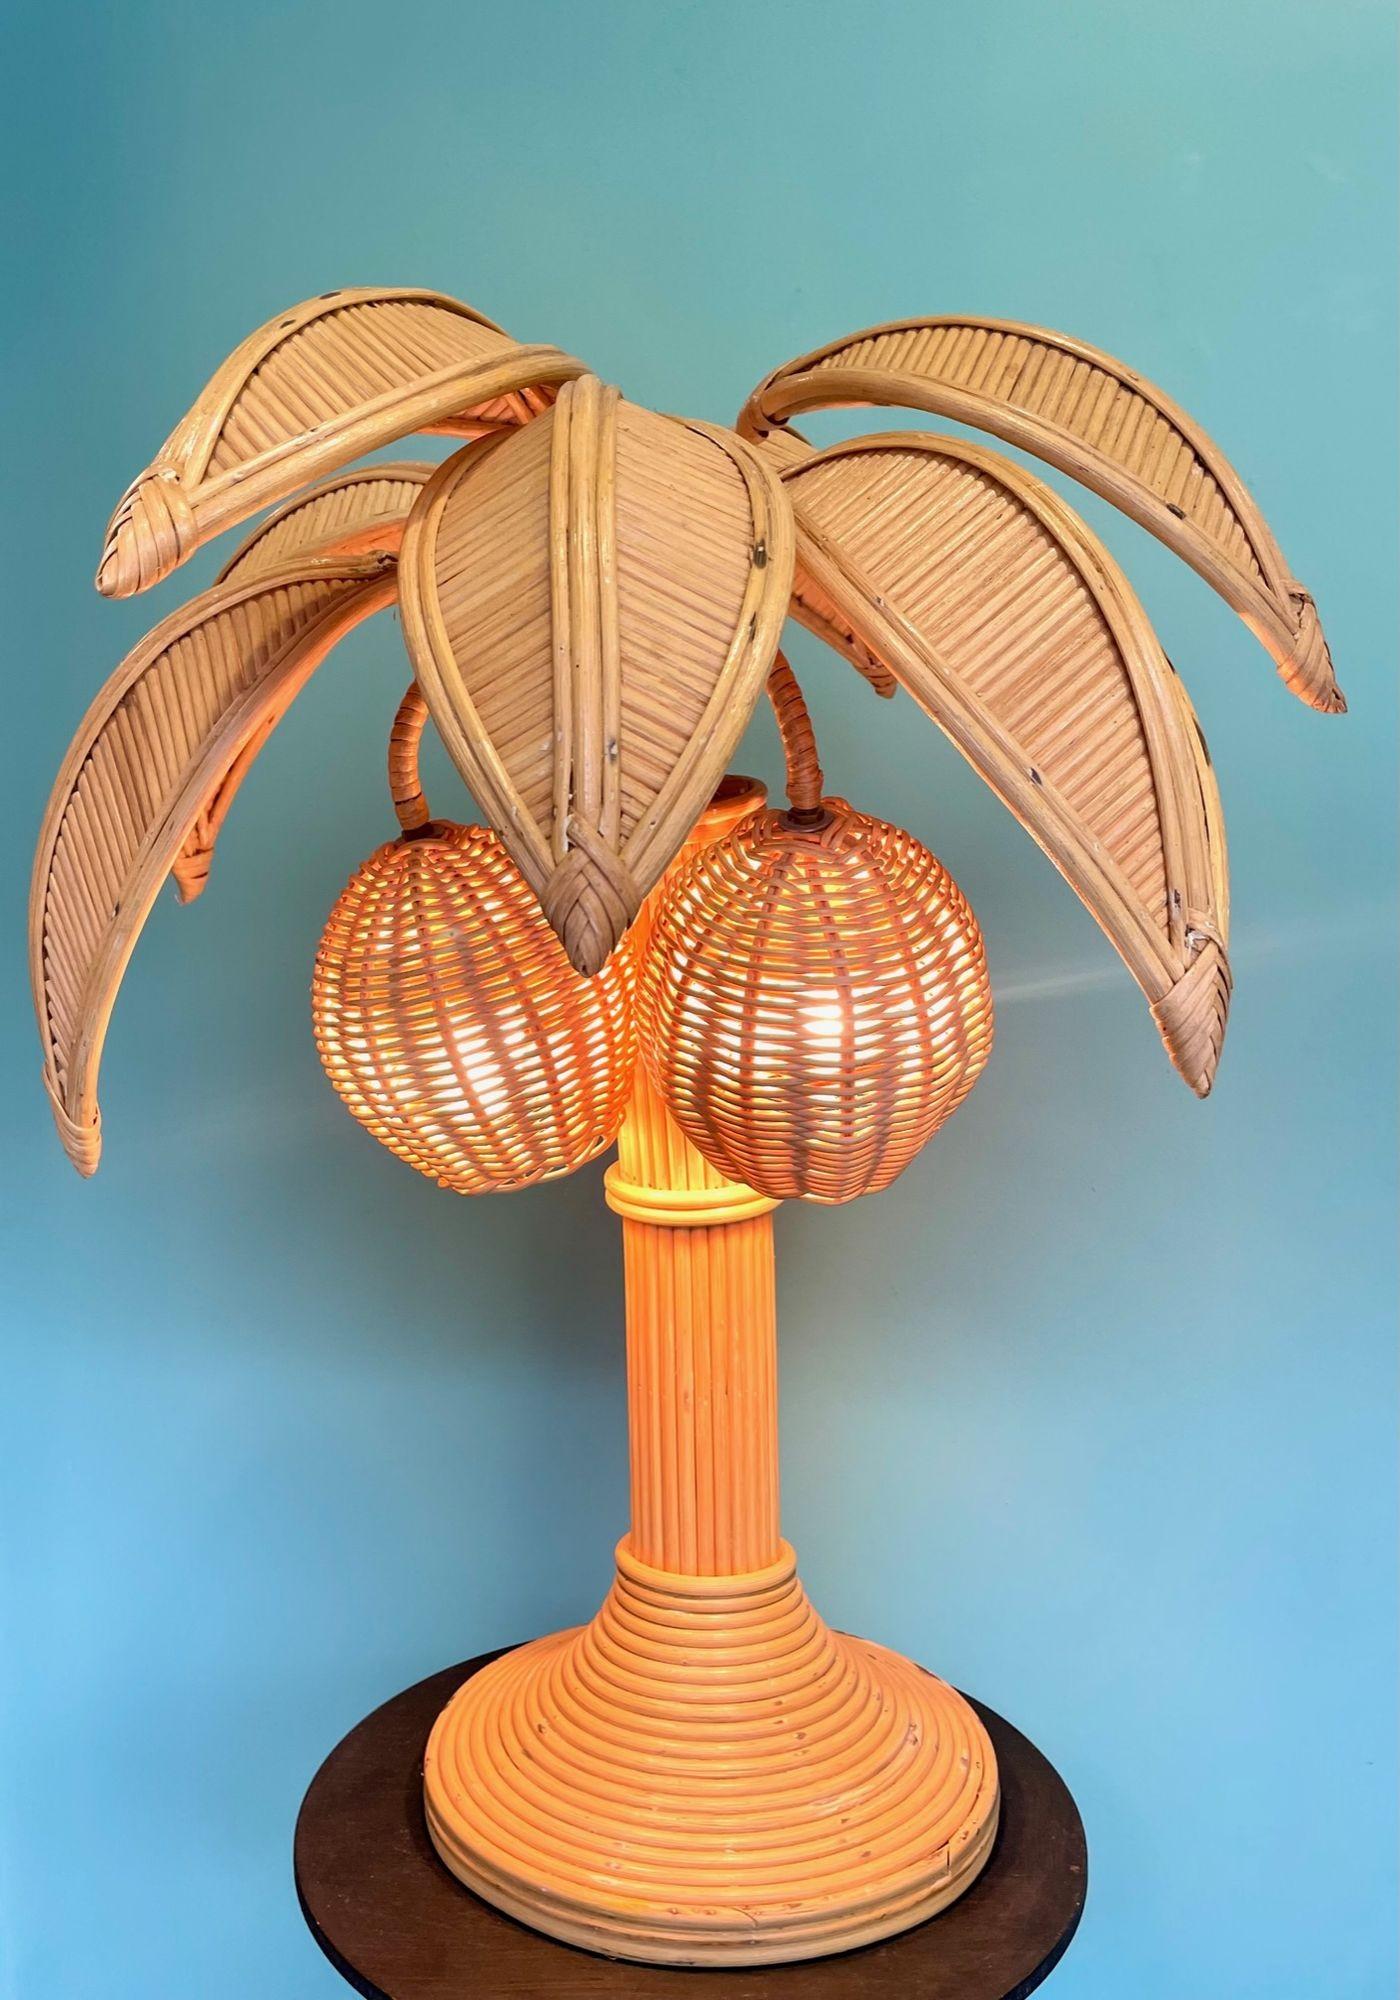 A bamboo palm tree table lamp with palm leaves and two coconut lights in the style of Mario Lopez Torres. Reiwred with new brass fittings and antique cord flex and switch.